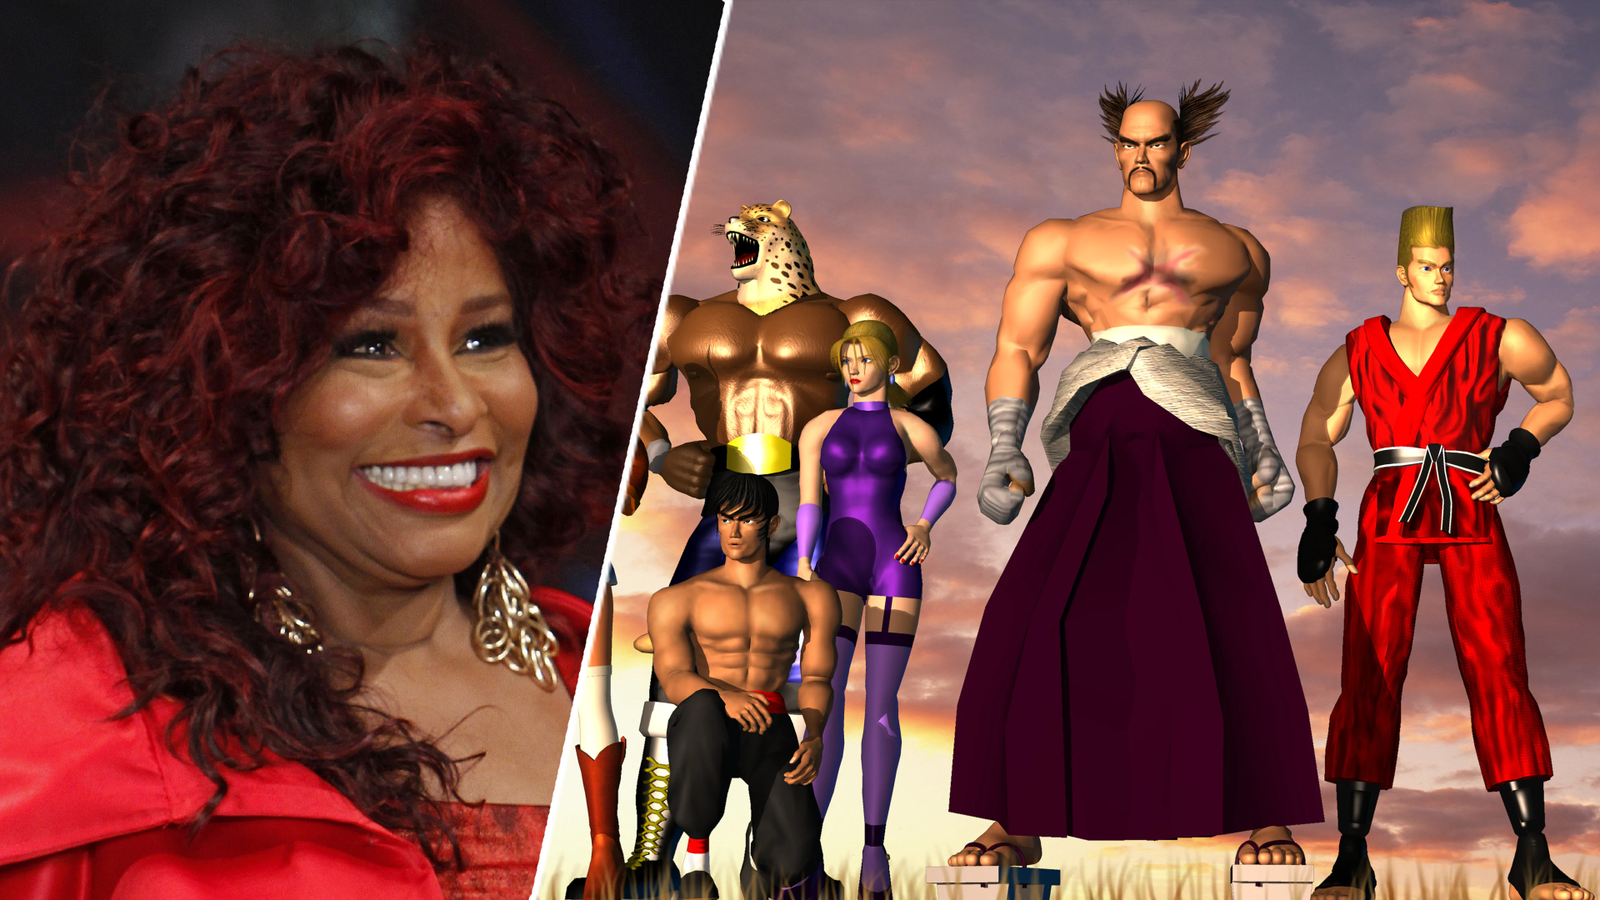 Chaka Khan is in a song about Tekken 2, for some reason